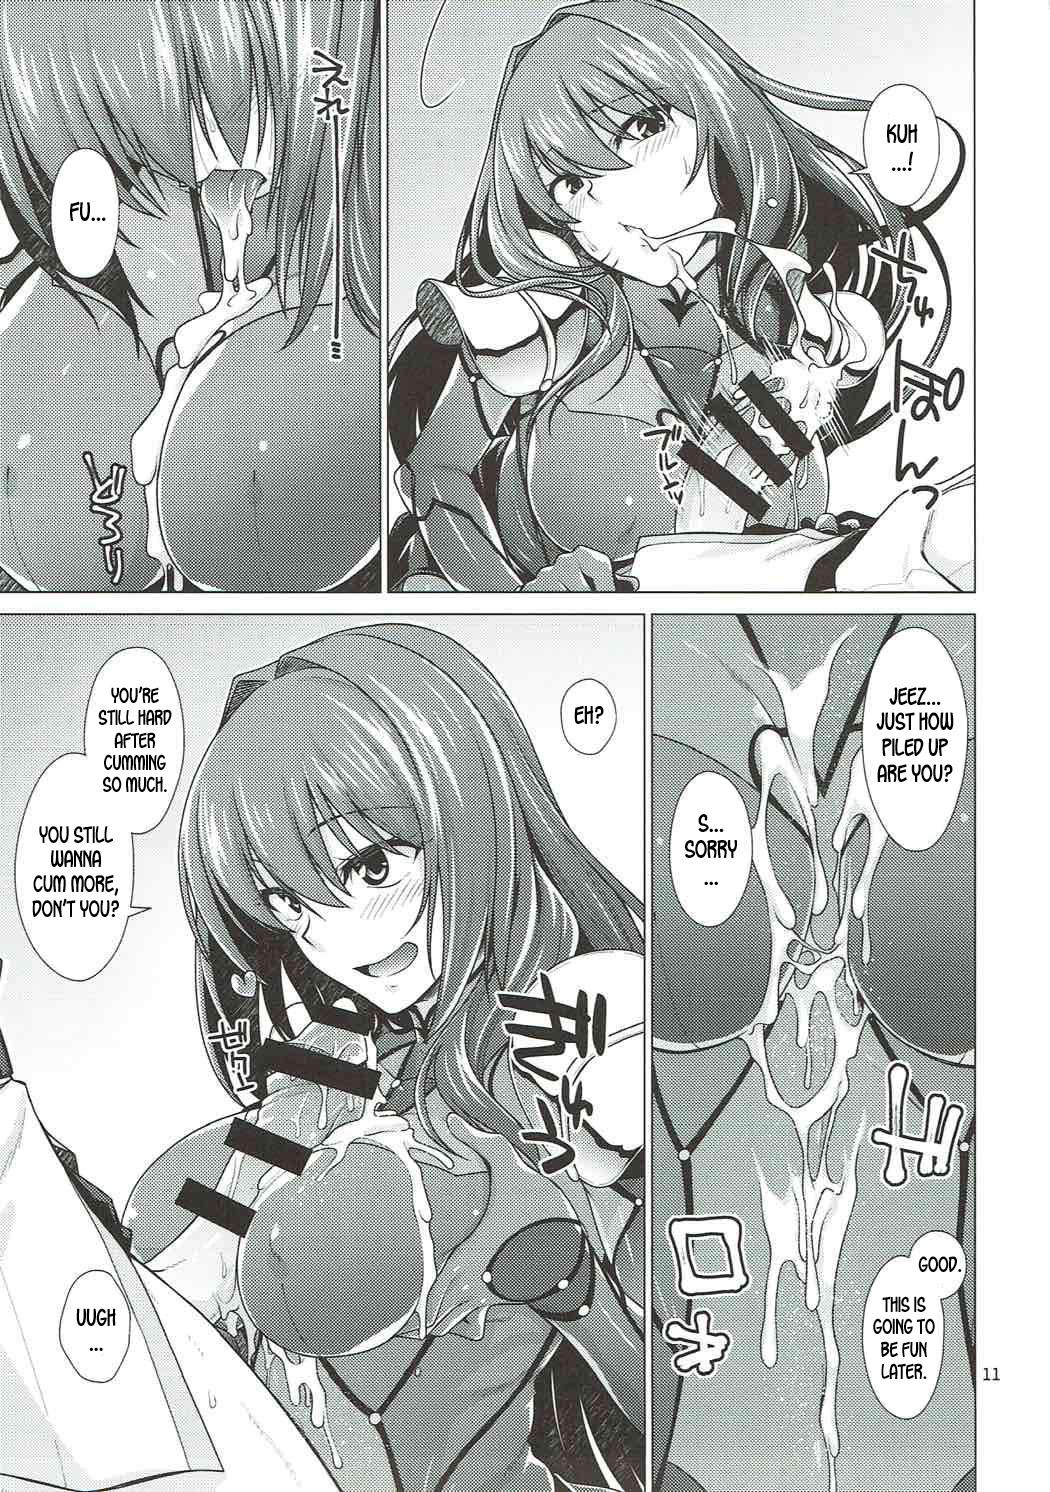 Babes Scathach Shishou to Celt Shiki Gachihamex! - Fate grand order Curves - Page 10